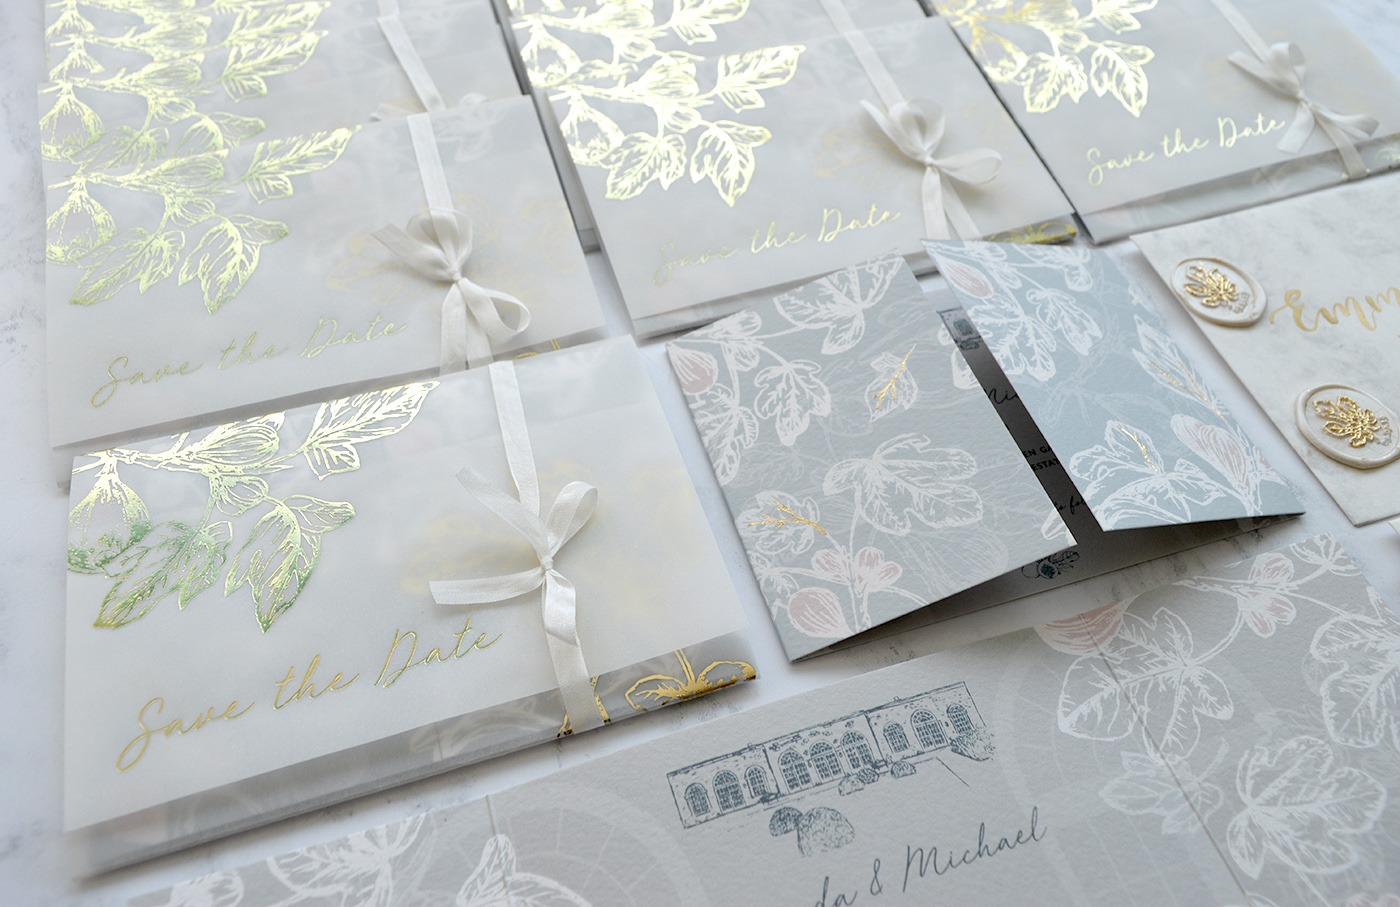 Foil Printed chromatic paper wraps by Amanda Michelle Design and Stationery